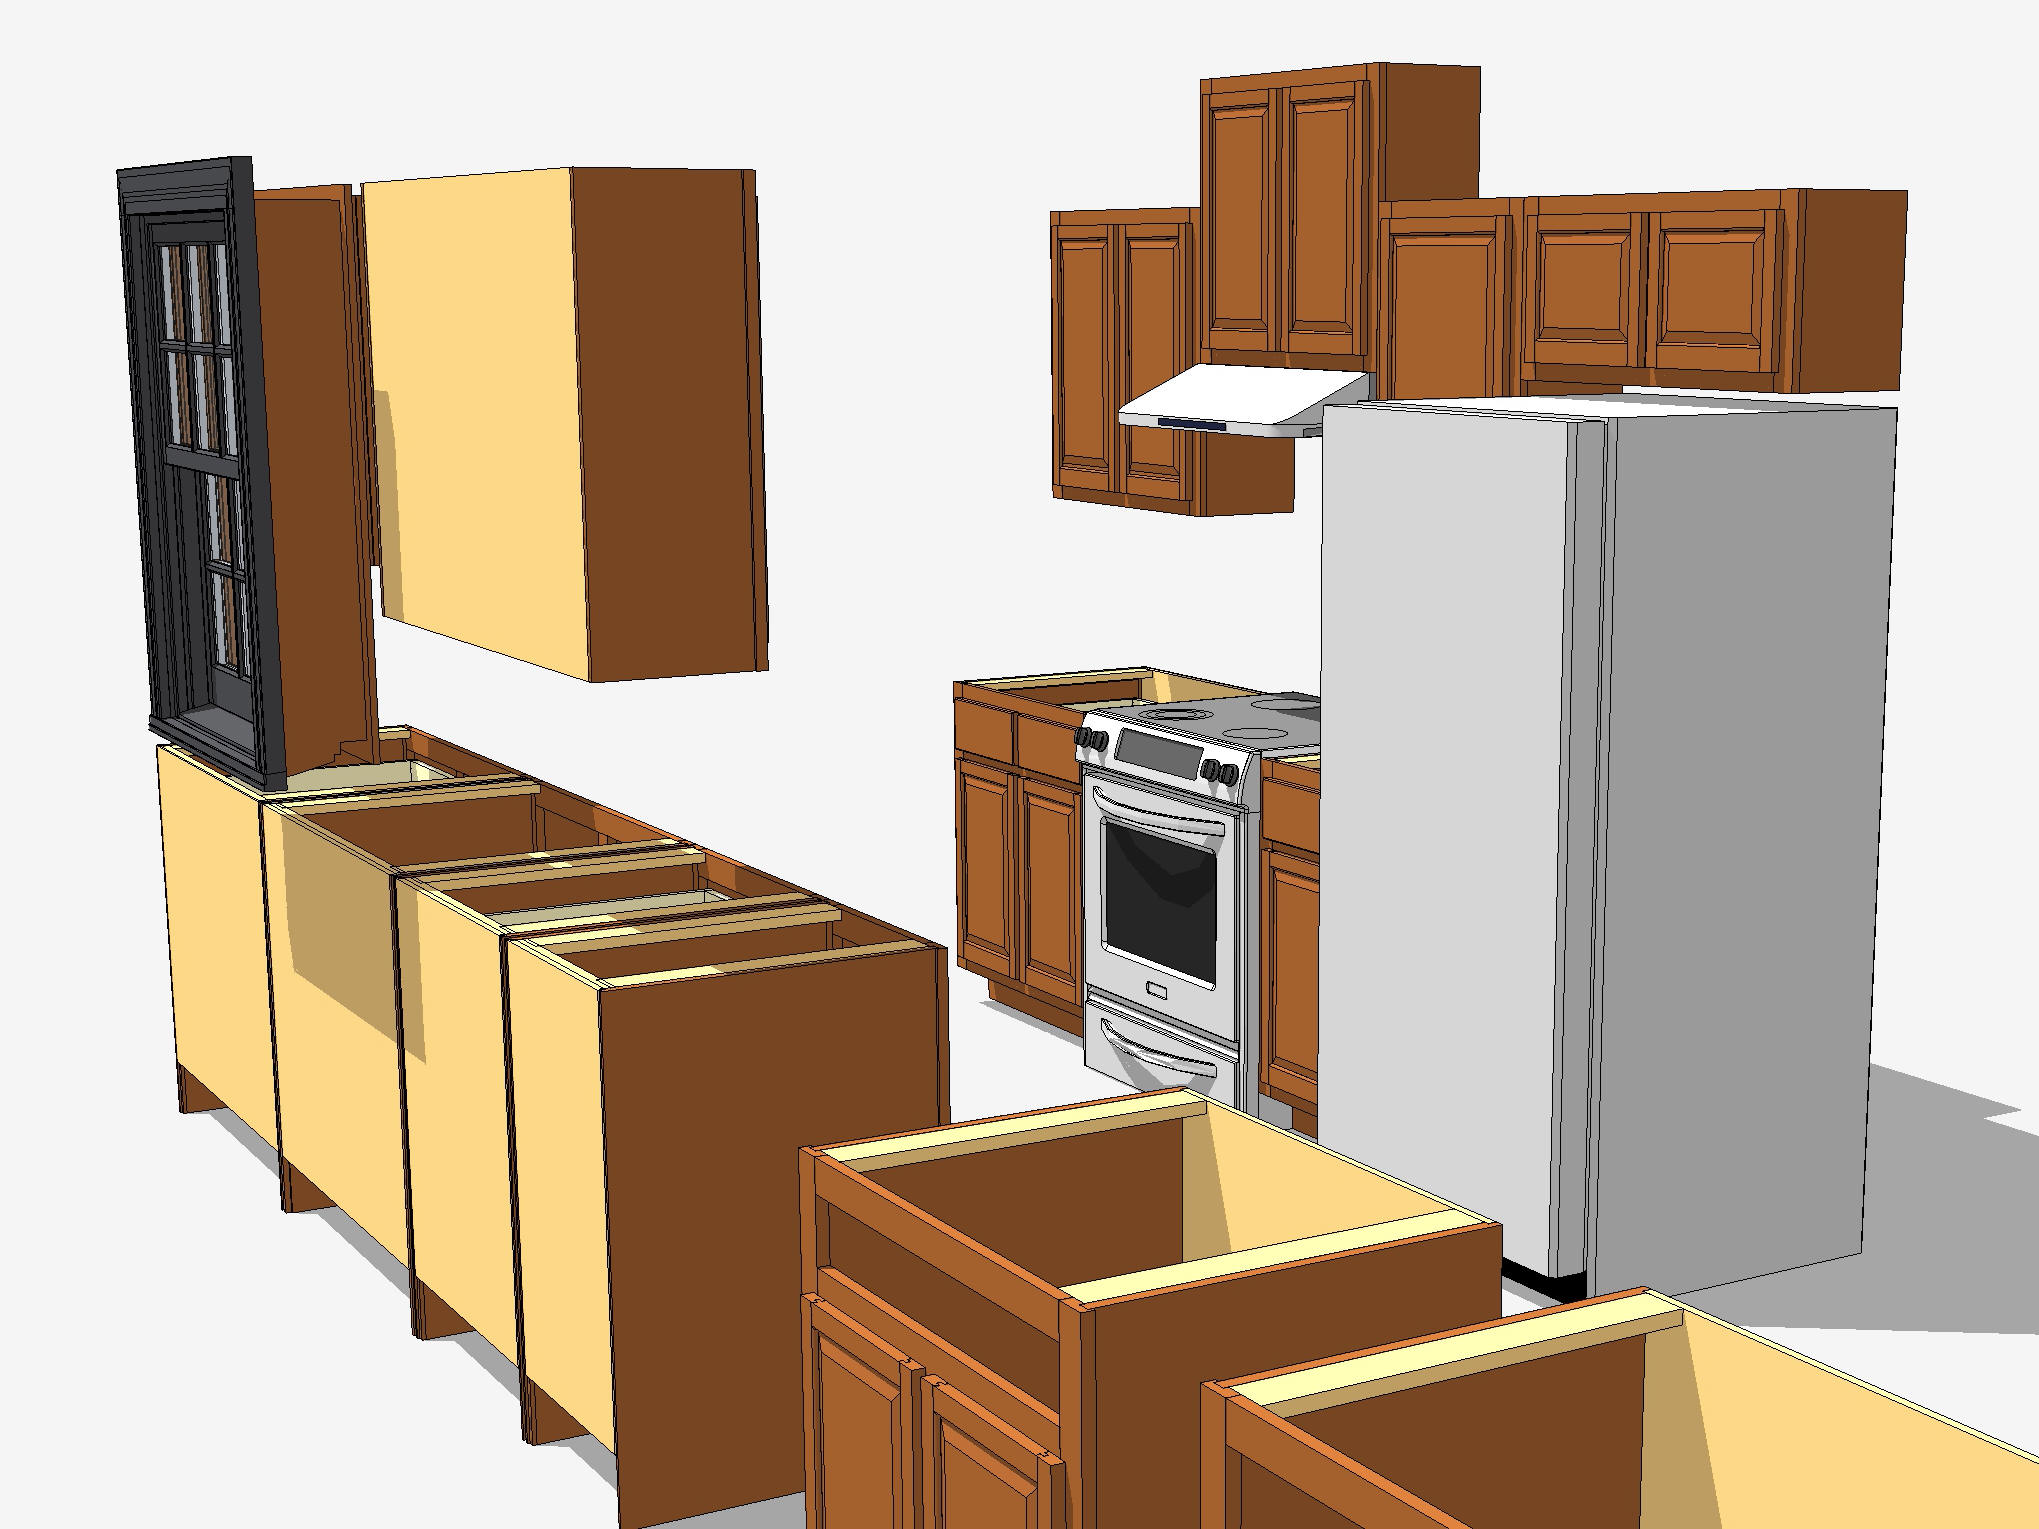 Image Gallery sketchup cabinets